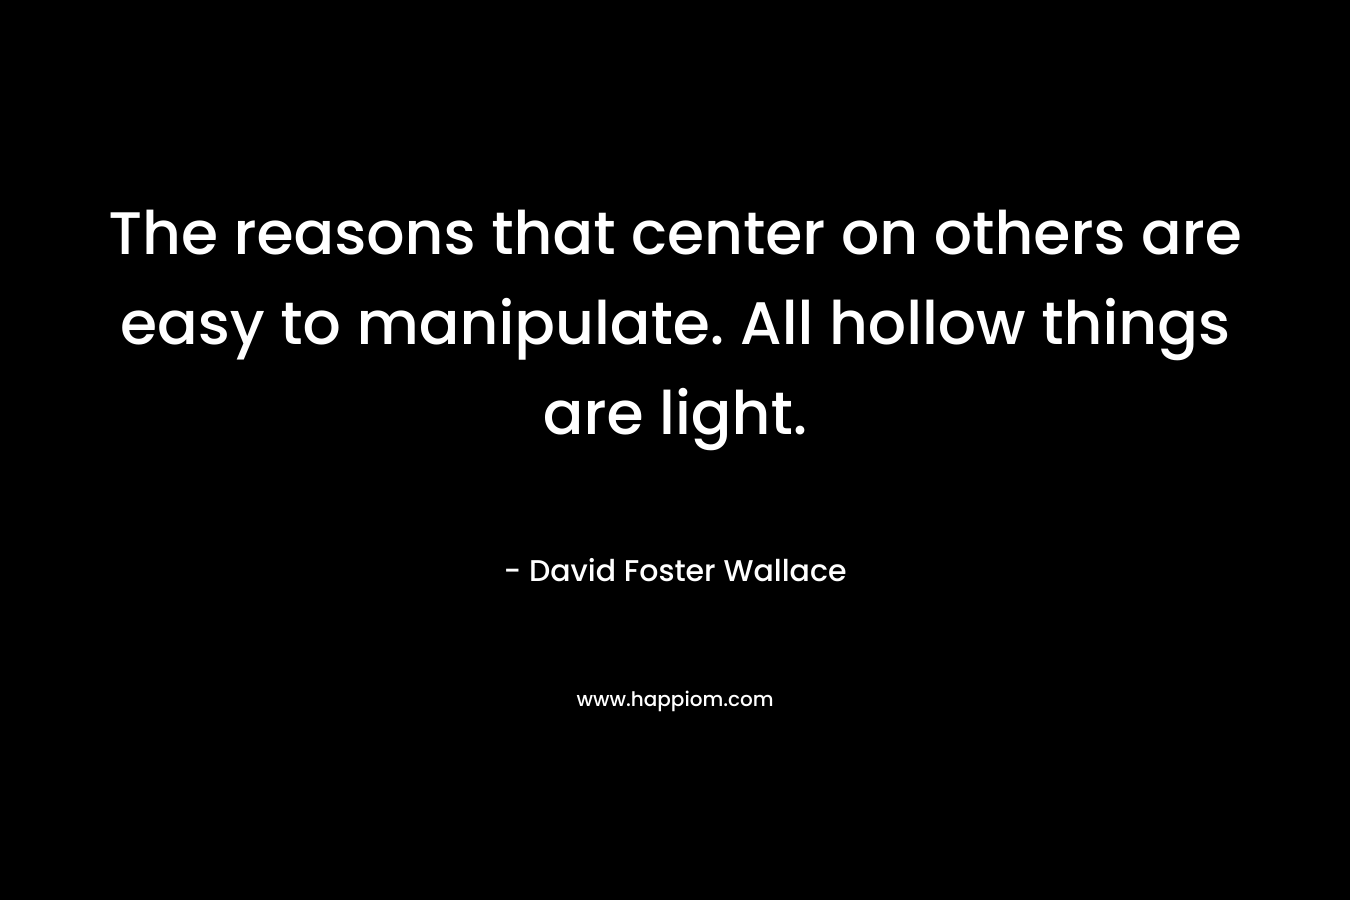 The reasons that center on others are easy to manipulate. All hollow things are light.